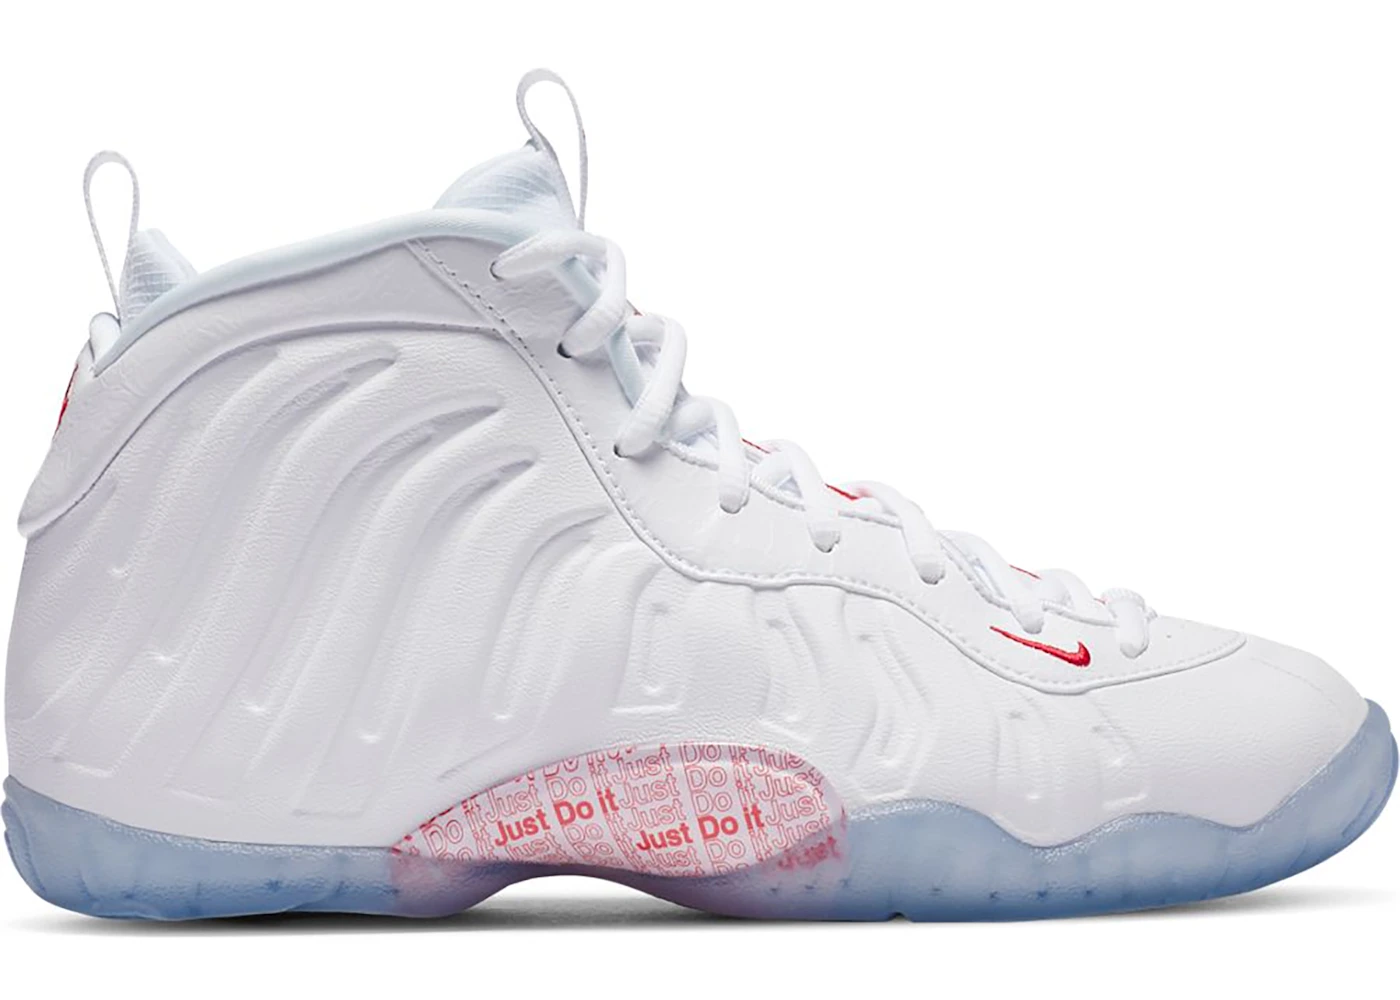 Nike Air Foamposite One Takeout Bag (GS) - CN5268-100/CU1055-100 - US